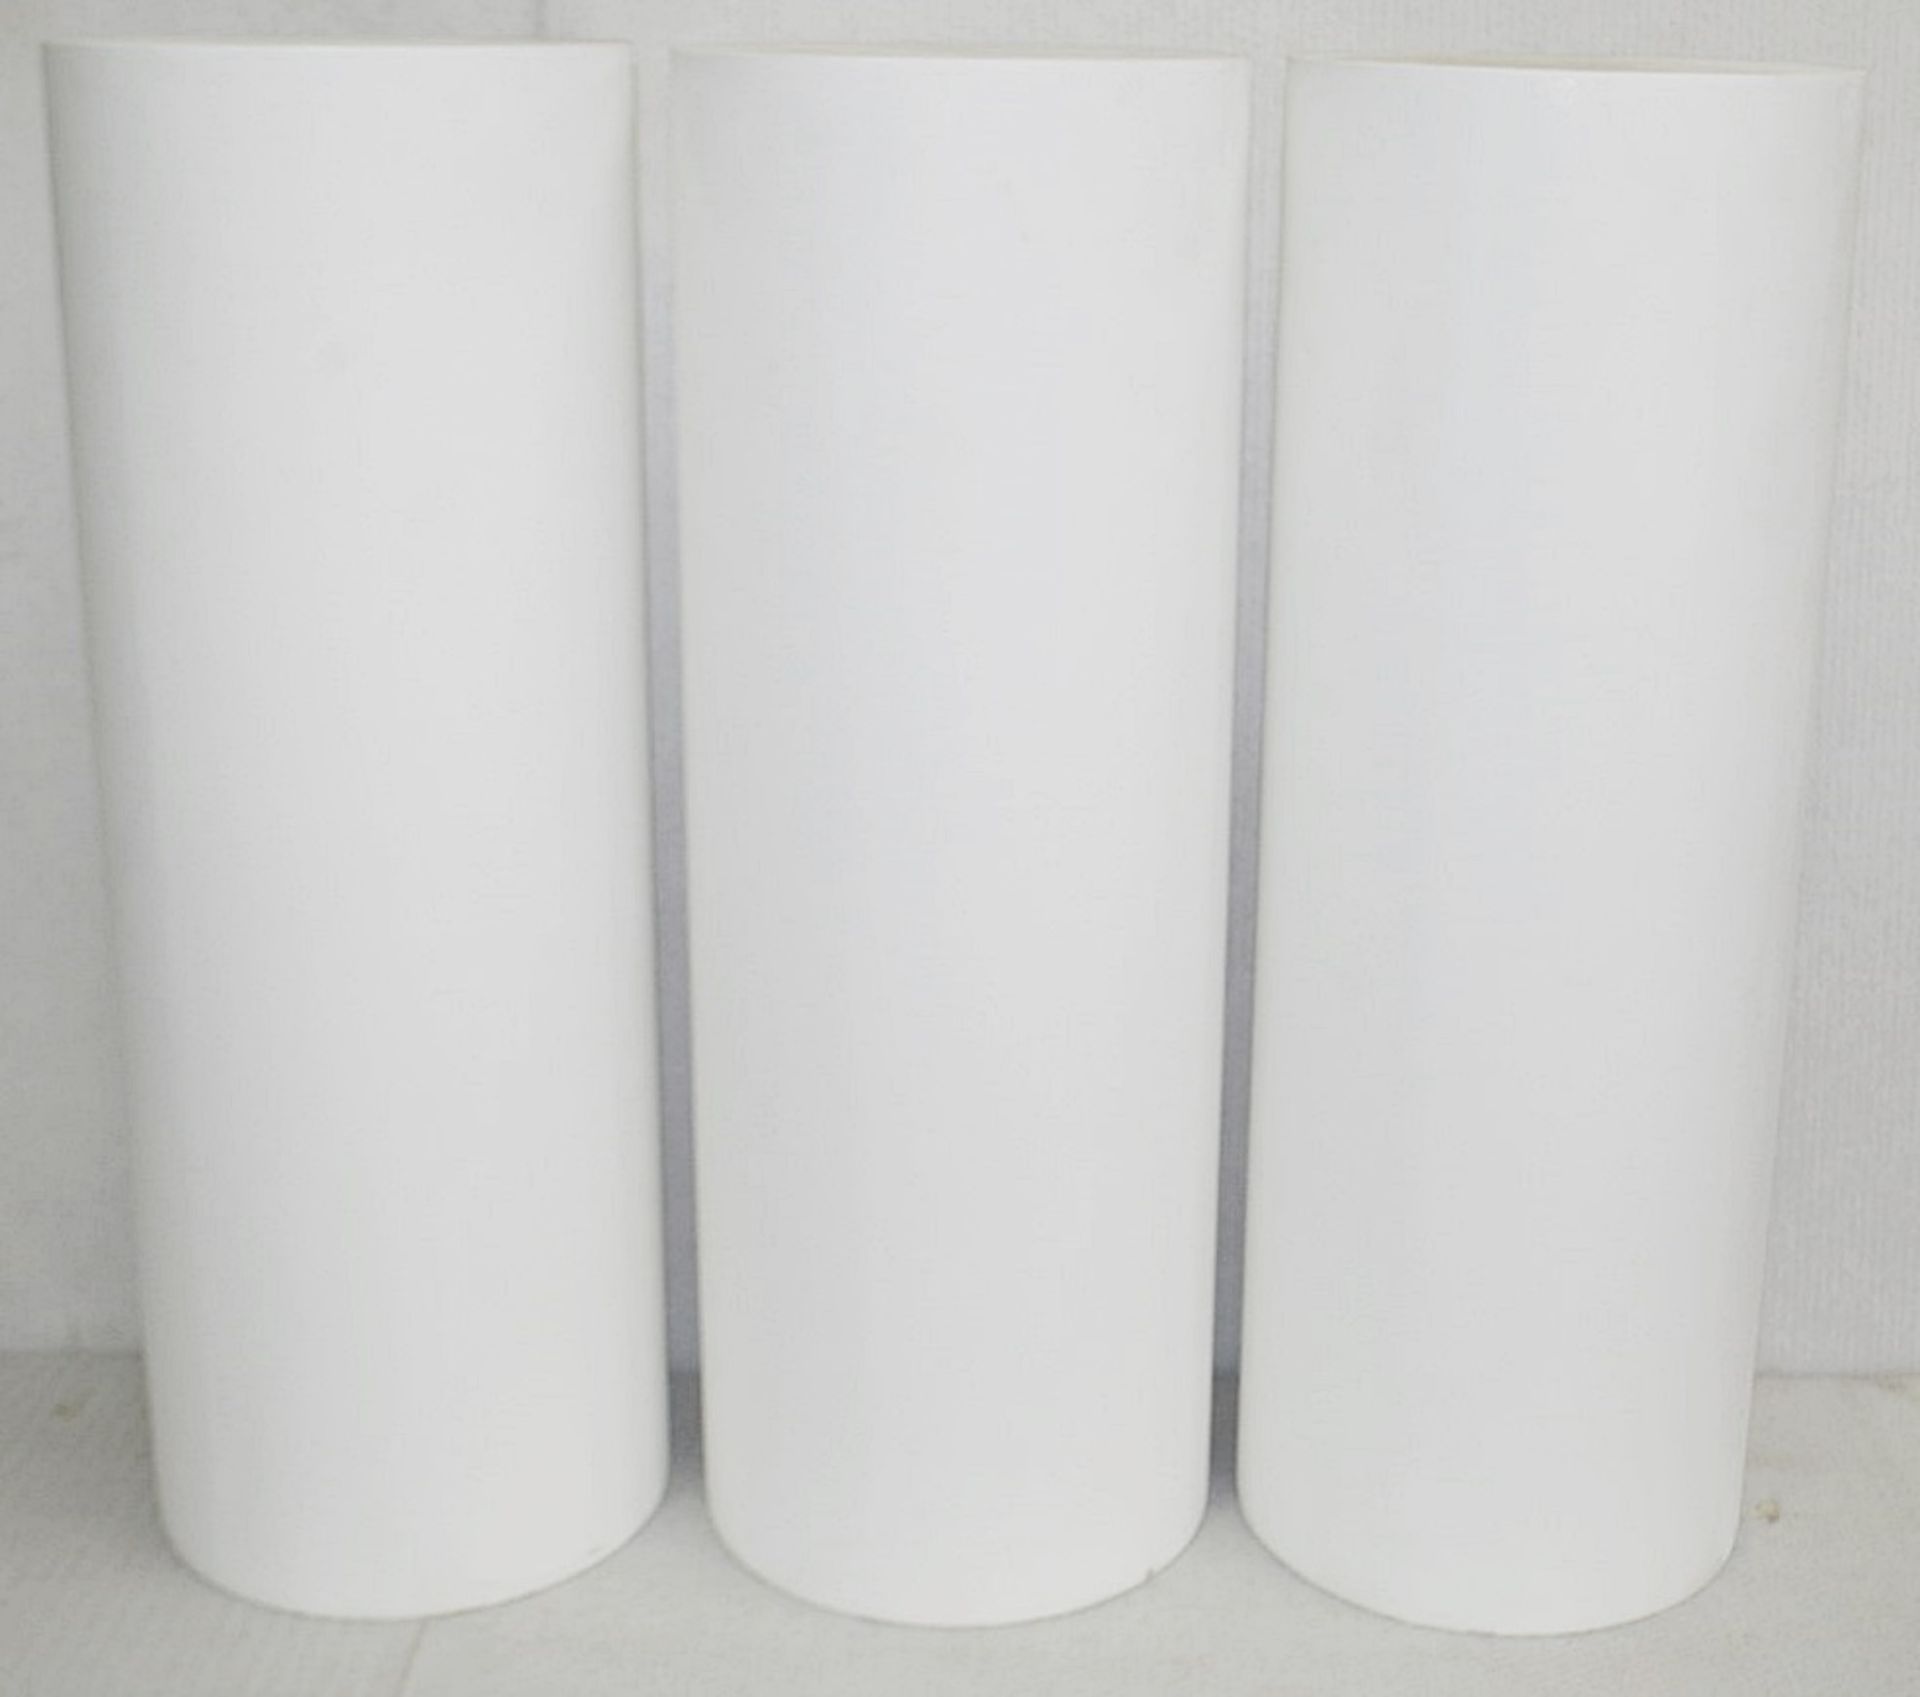 Set Of 3 x Cylinder 1-Metre Tall Retail Shop Display Plinths - Dimensions: Height 100cm / ø 36cm - Image 2 of 5